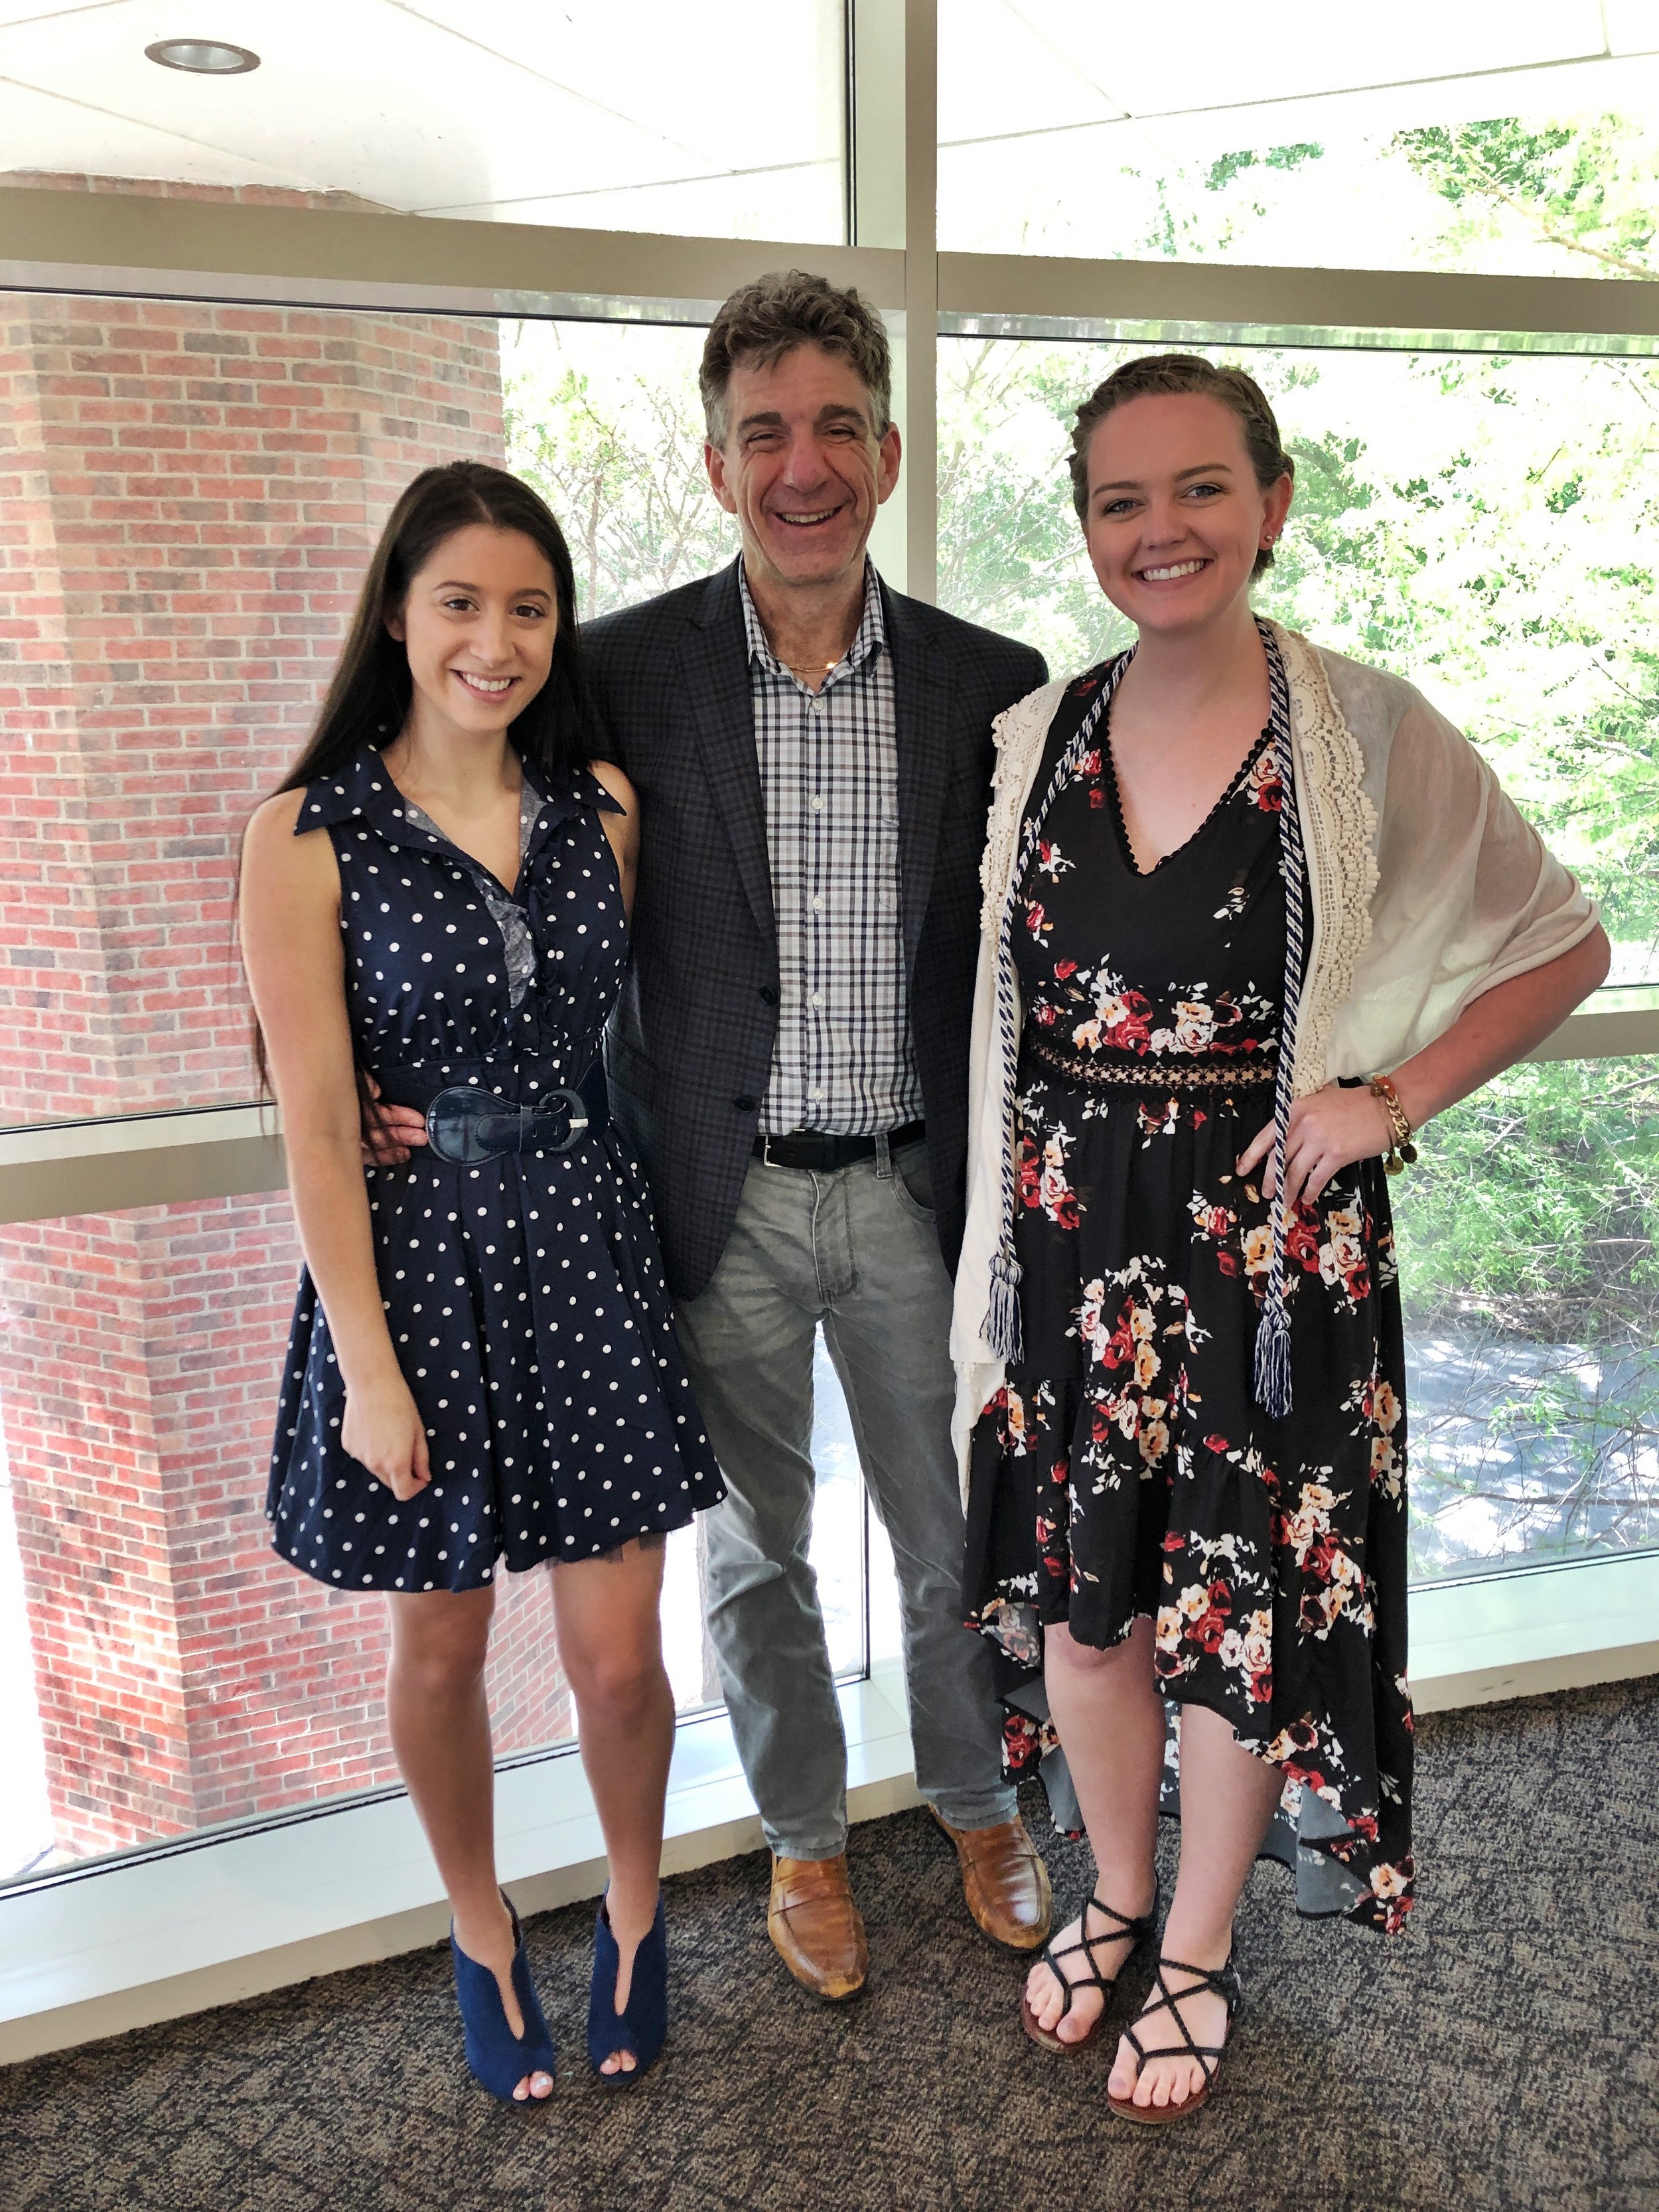 Kestyn, Dr. Marcovitch, and Abby following the Psi Chi Induction Ceremony